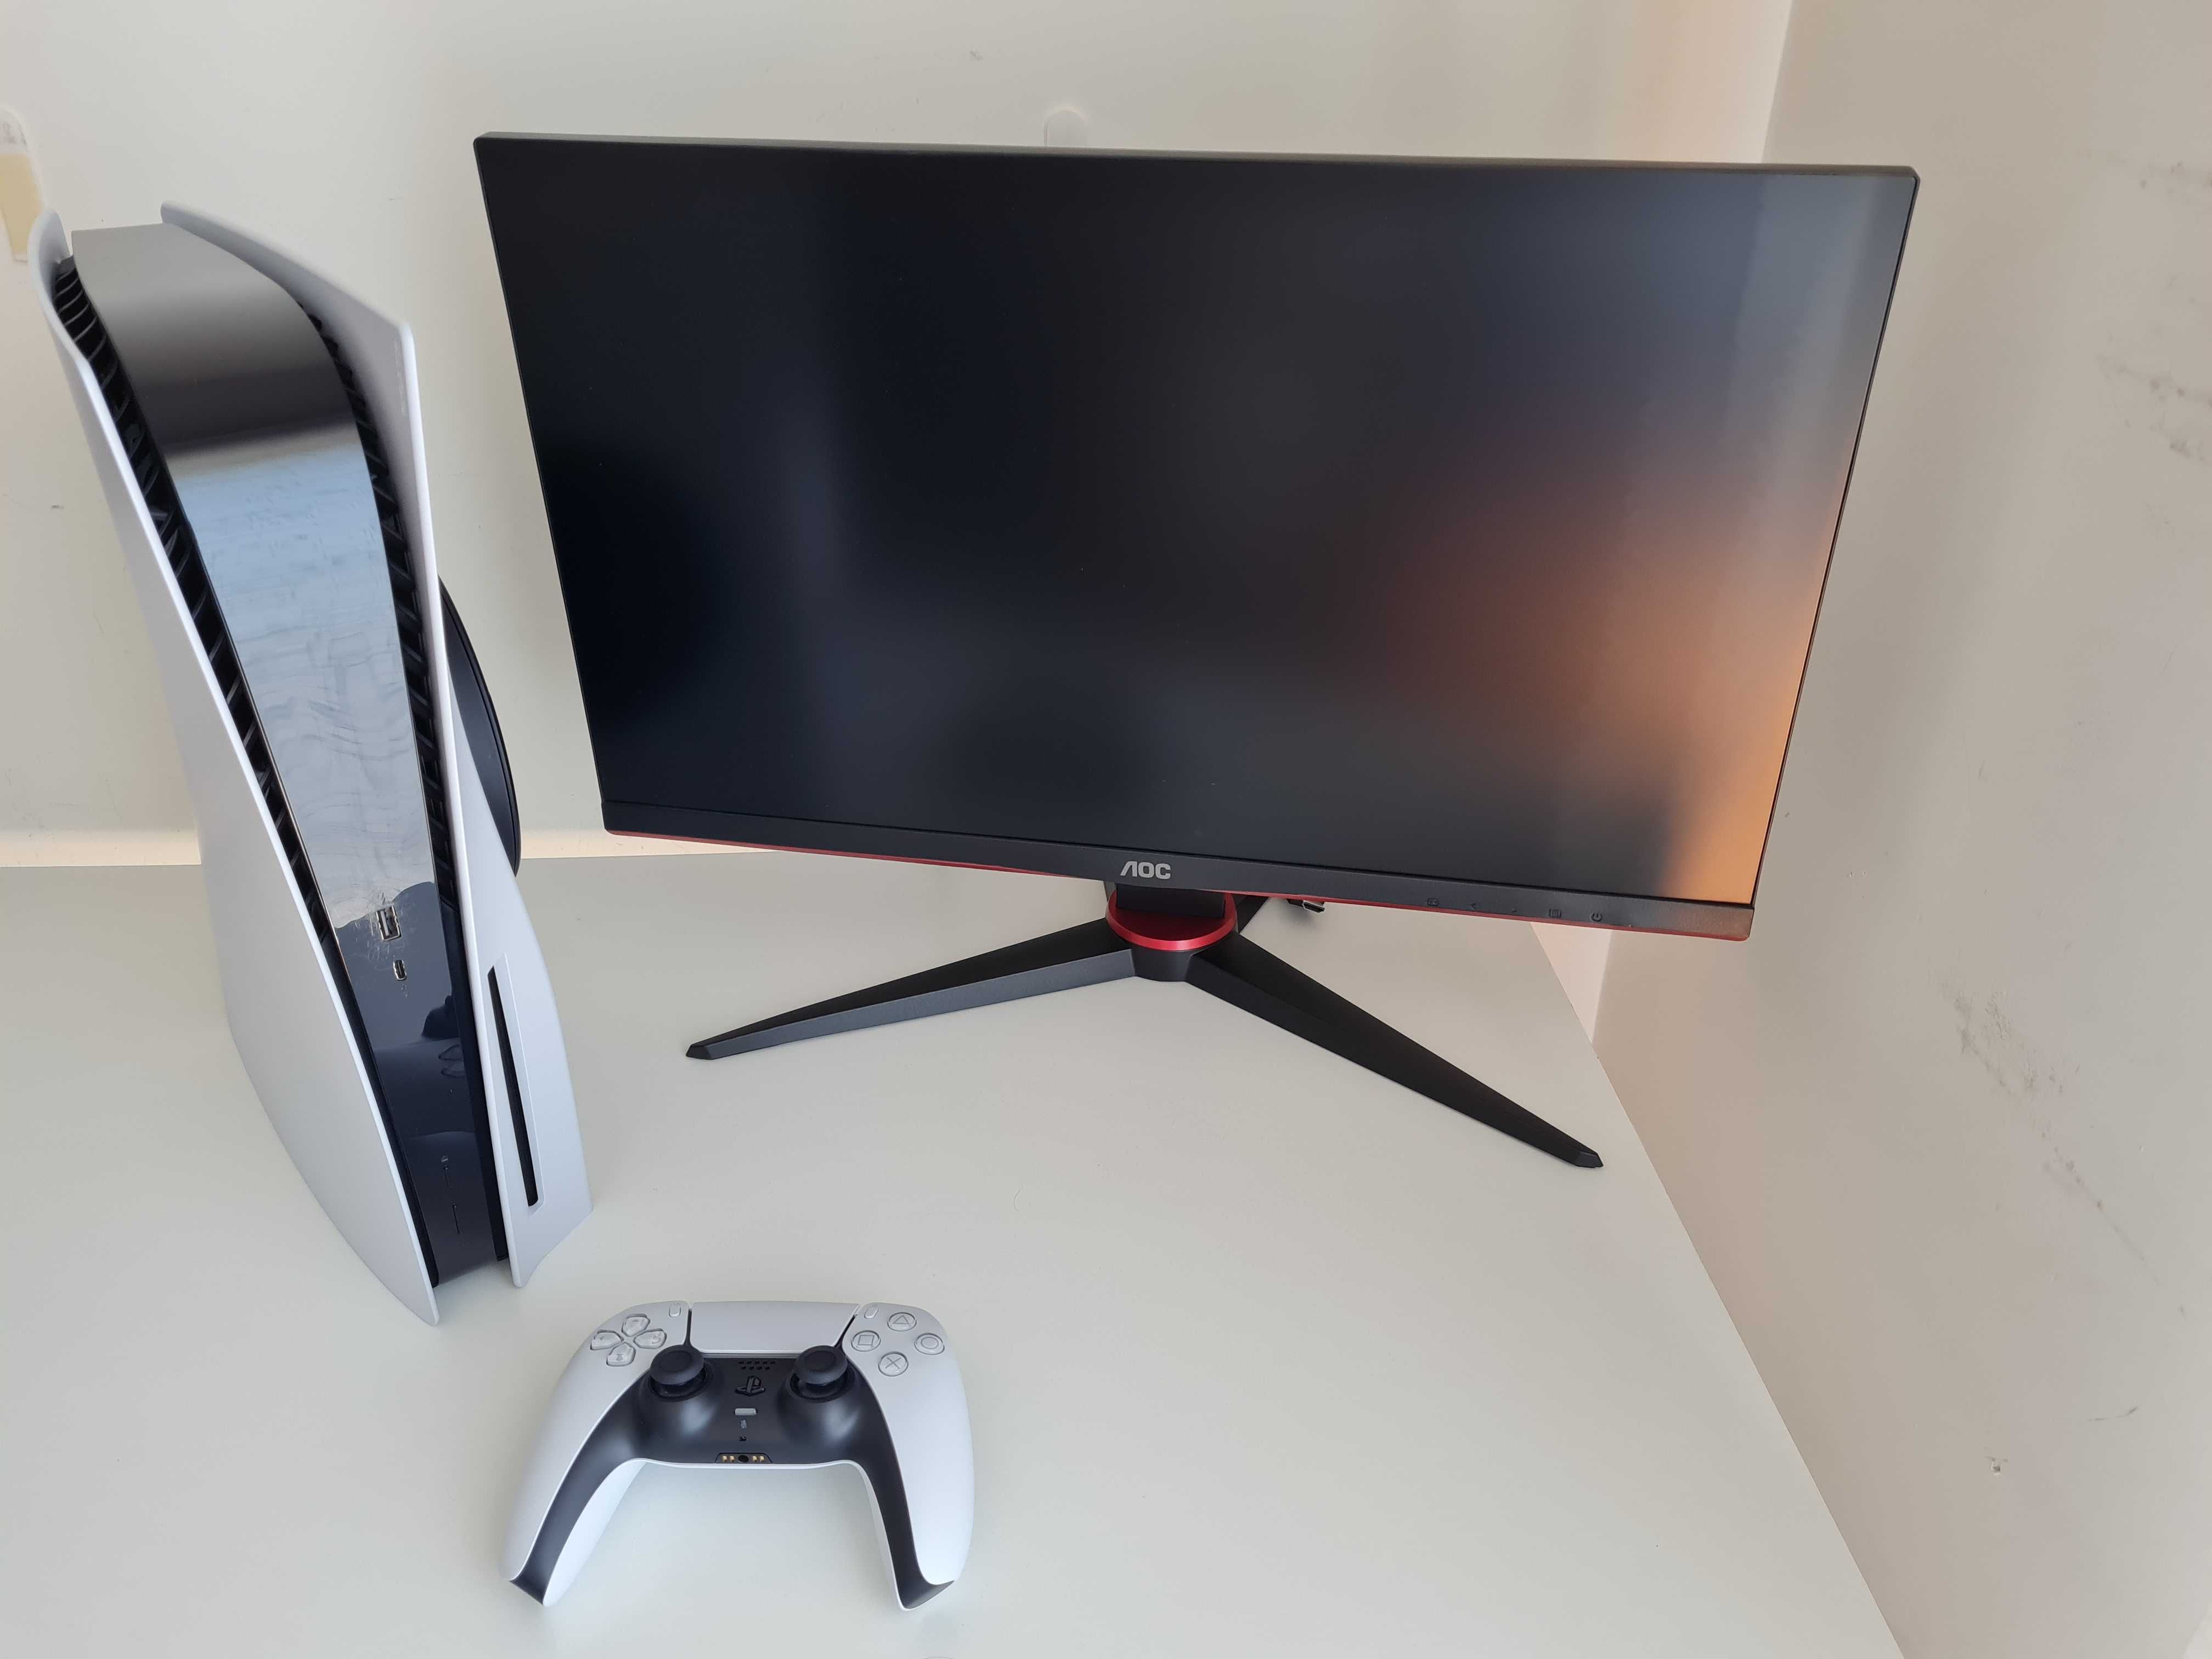 PS5 & AOC Monitor (Less than a year old. Sold separate or together)